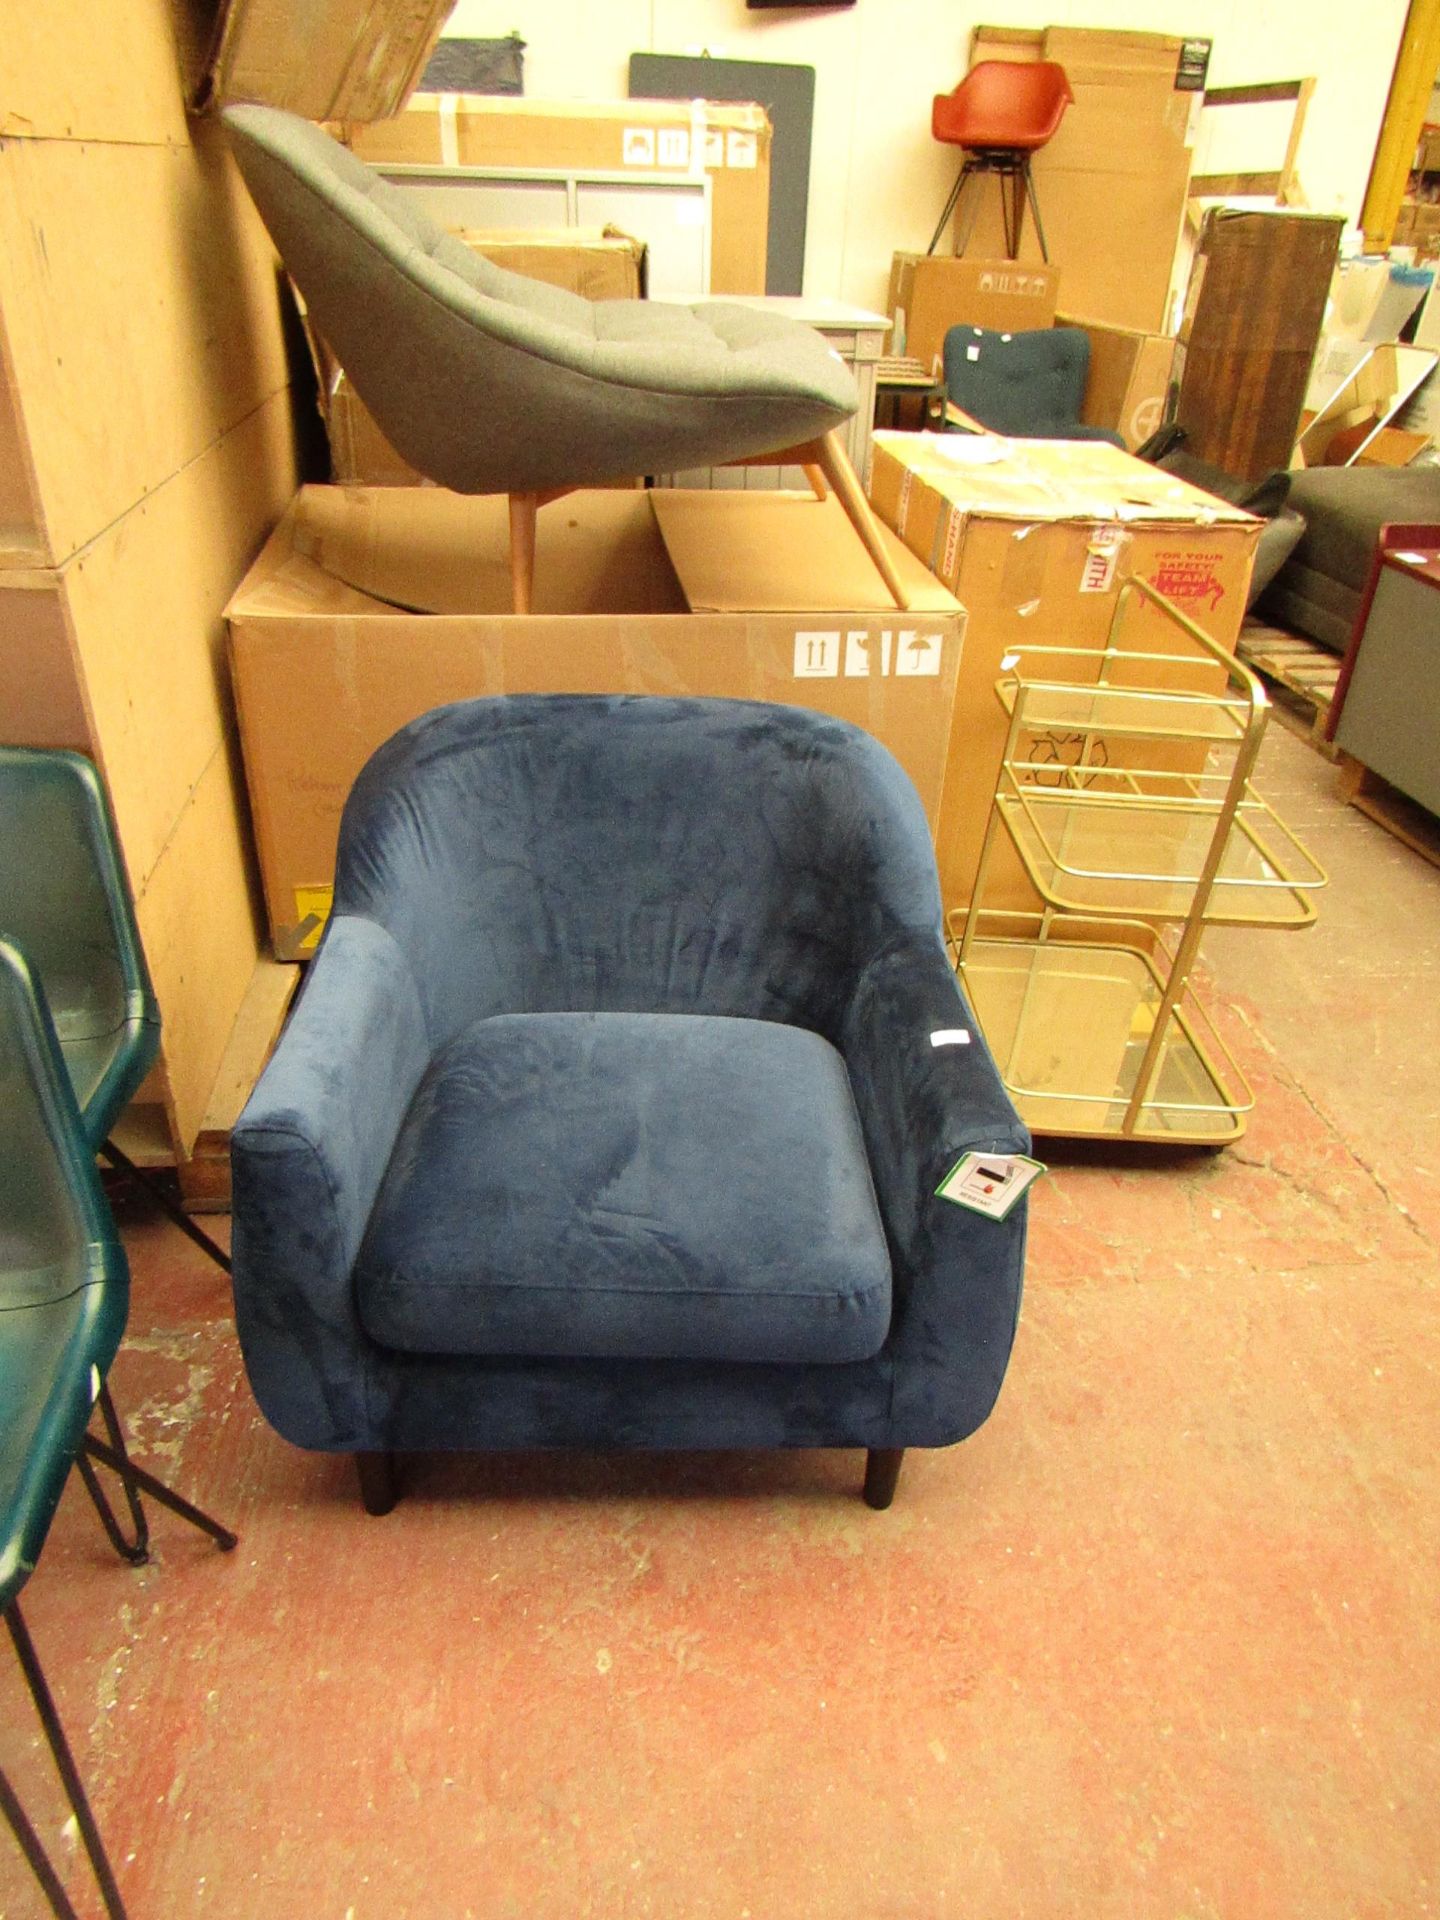 | 1X | MADE.COM BLUE VELOUR ACCENT CHAIR| LOOKS TO BE IN VERY GOOD CONDITION JUST A COUPLE OF